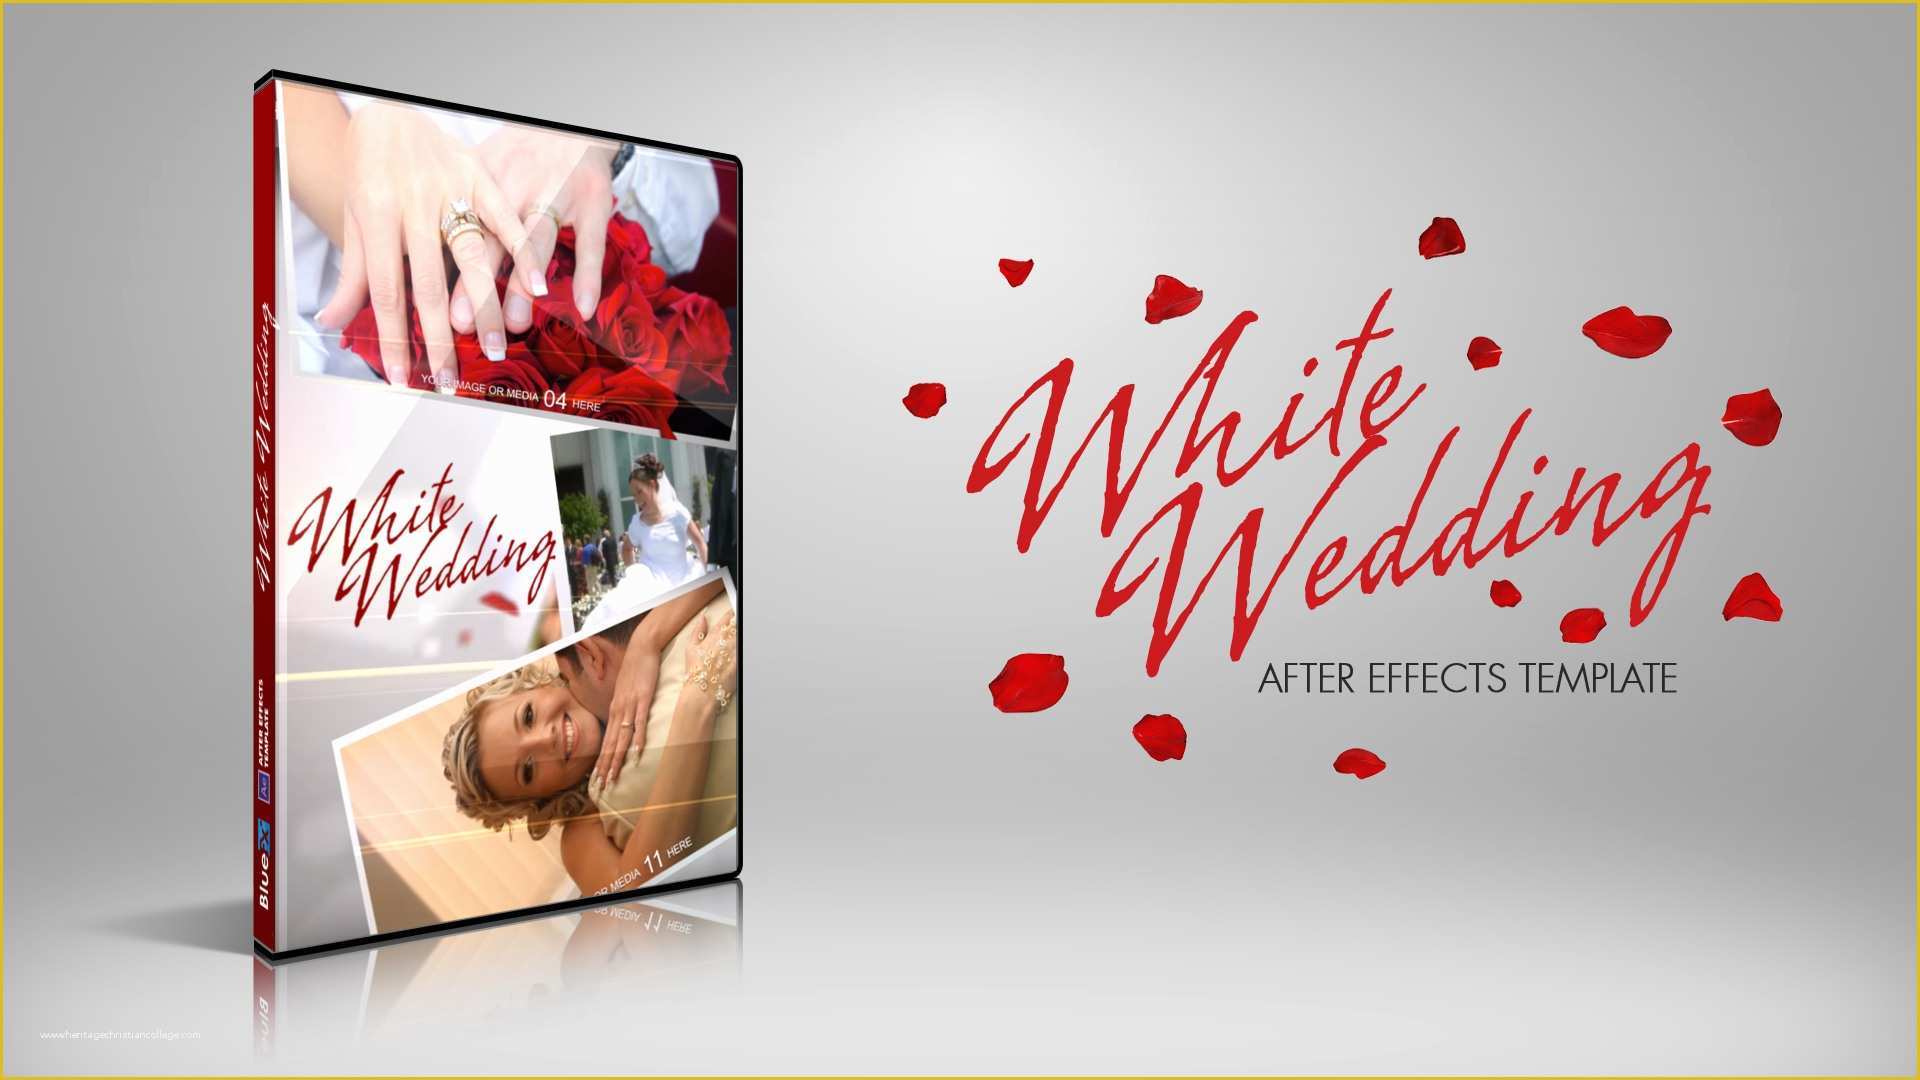 After Effects Holiday Templates Free Of after Effects Template White Wedding